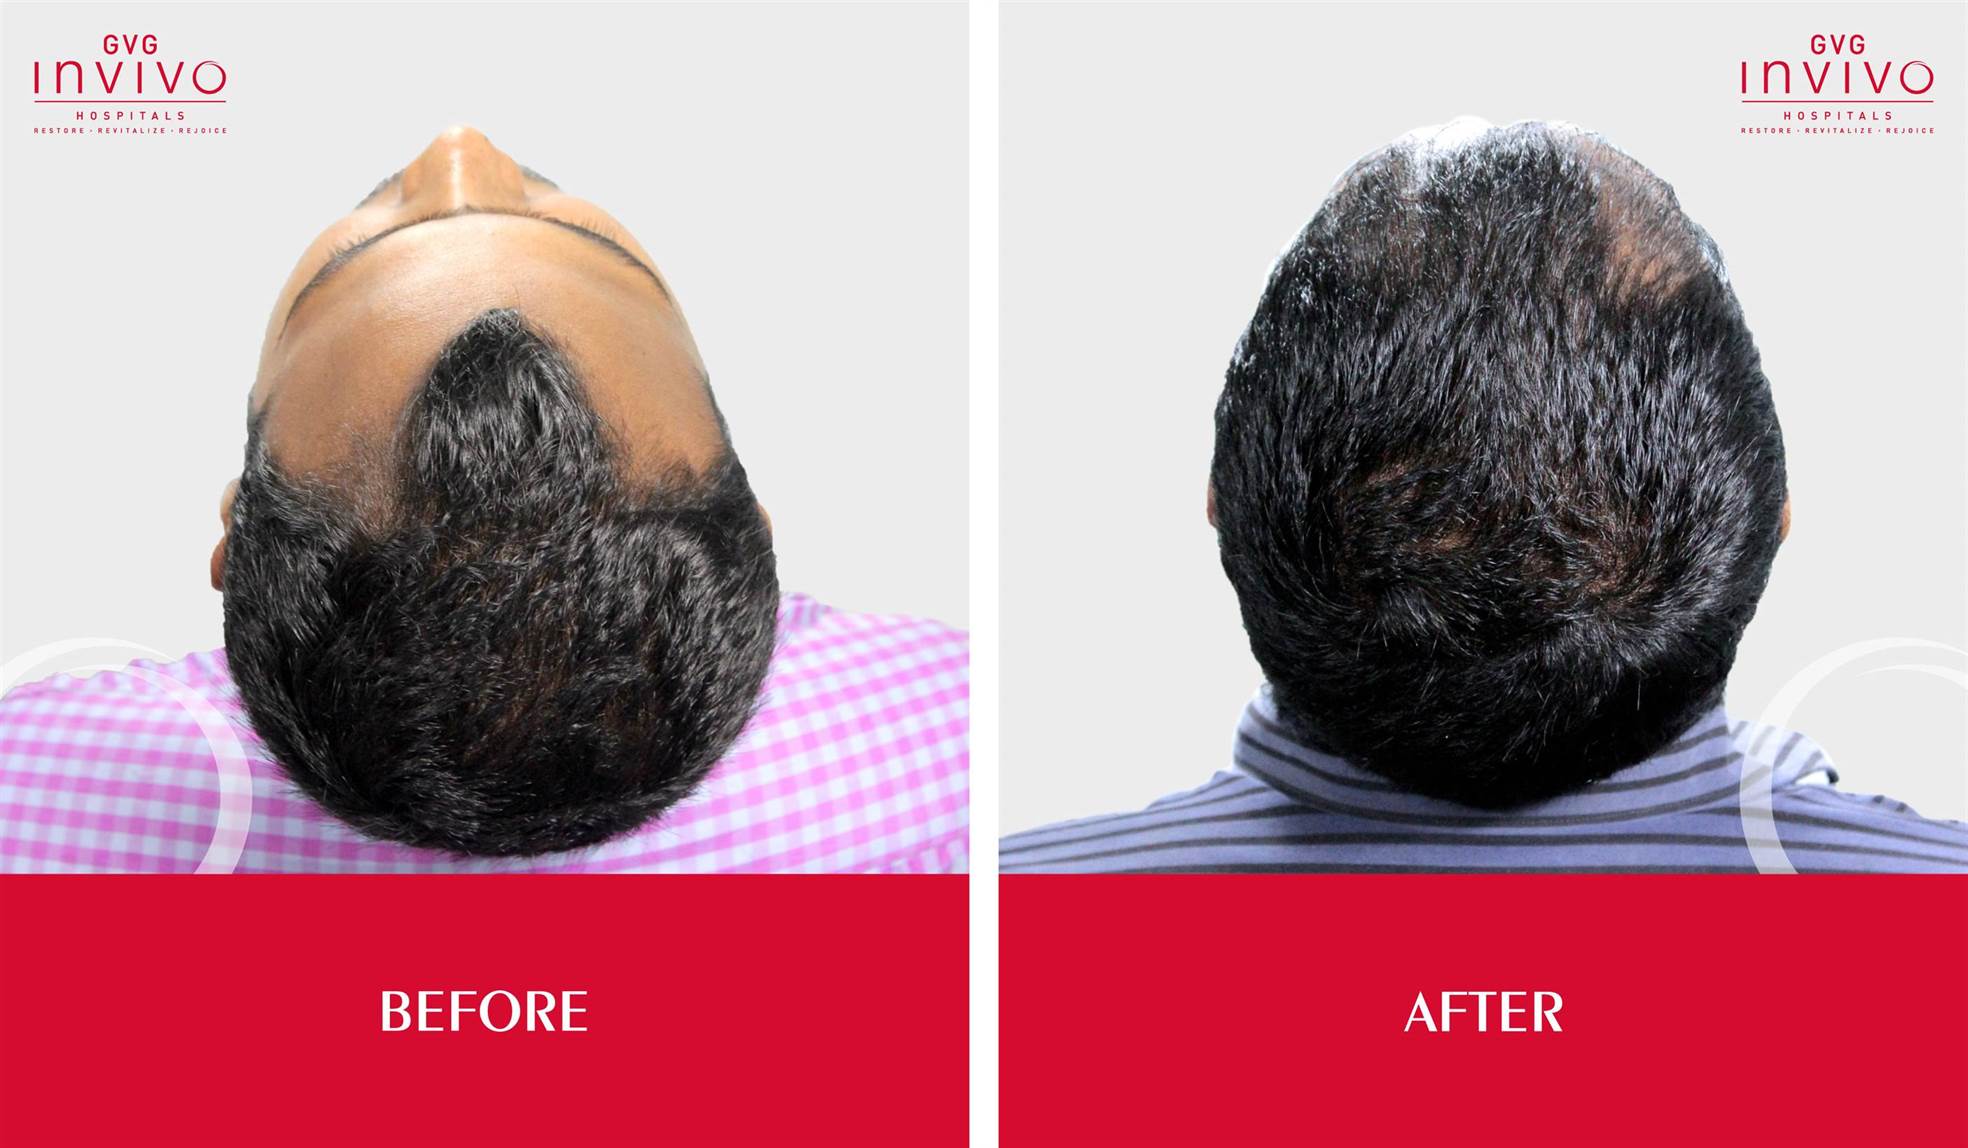 Hair Transplant Clinic In Bangalore - Performed by Expert Surgeon. Hair  transplant, Best Hair Transplant clinic in Bangalore, Hair Transplant cost  in Bangalore. hair transplant clinic near me, best hair transplantation  surgeon